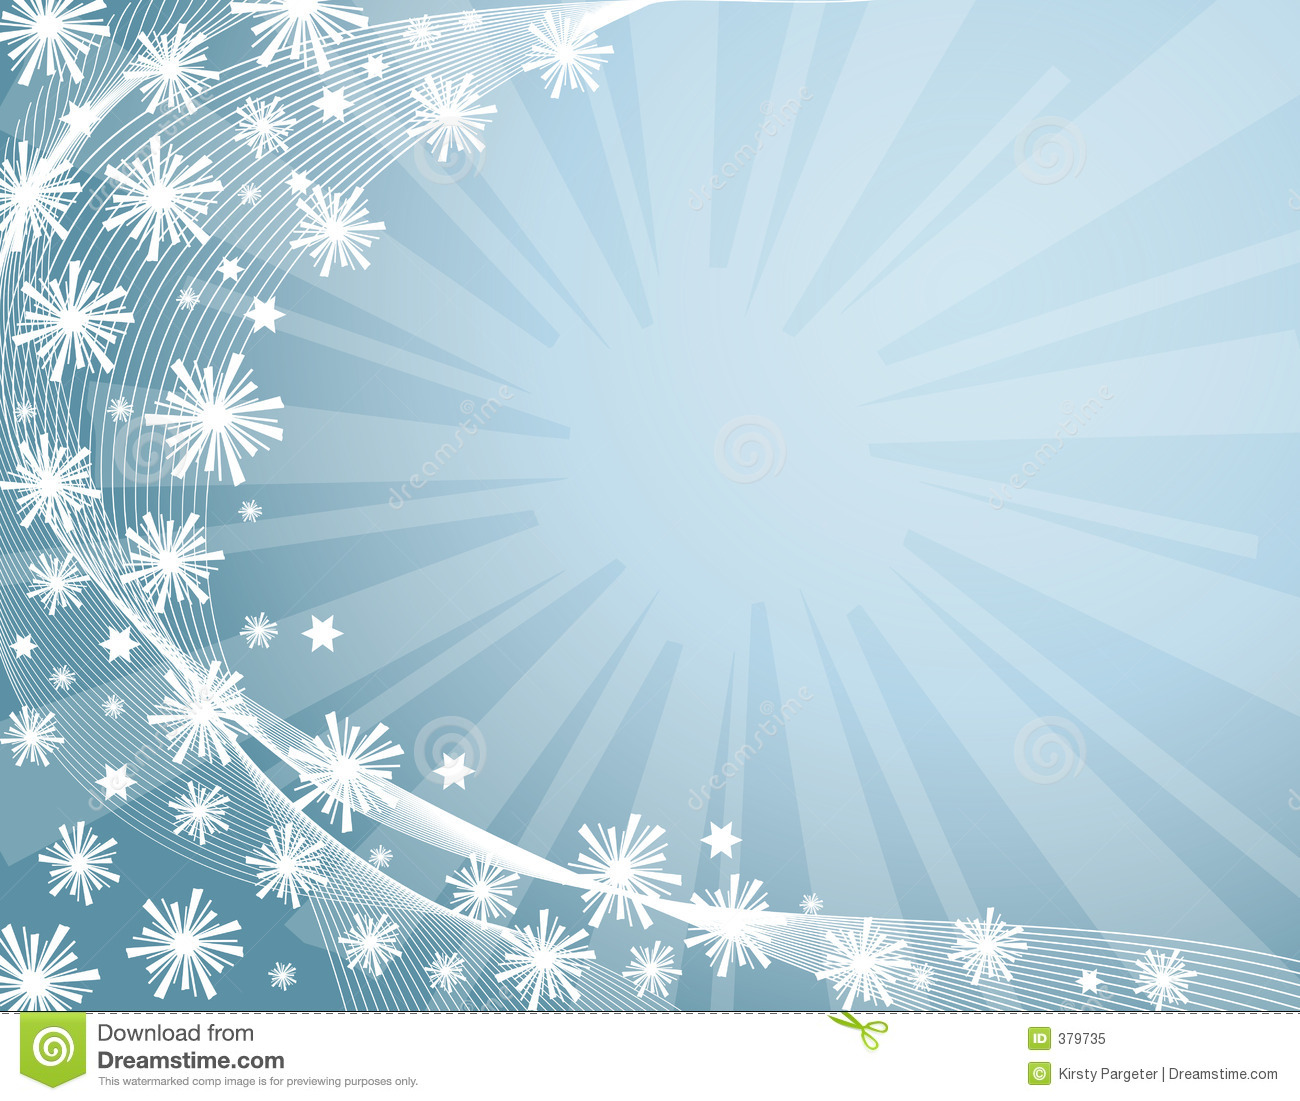  Winter Background Images 1300x1101